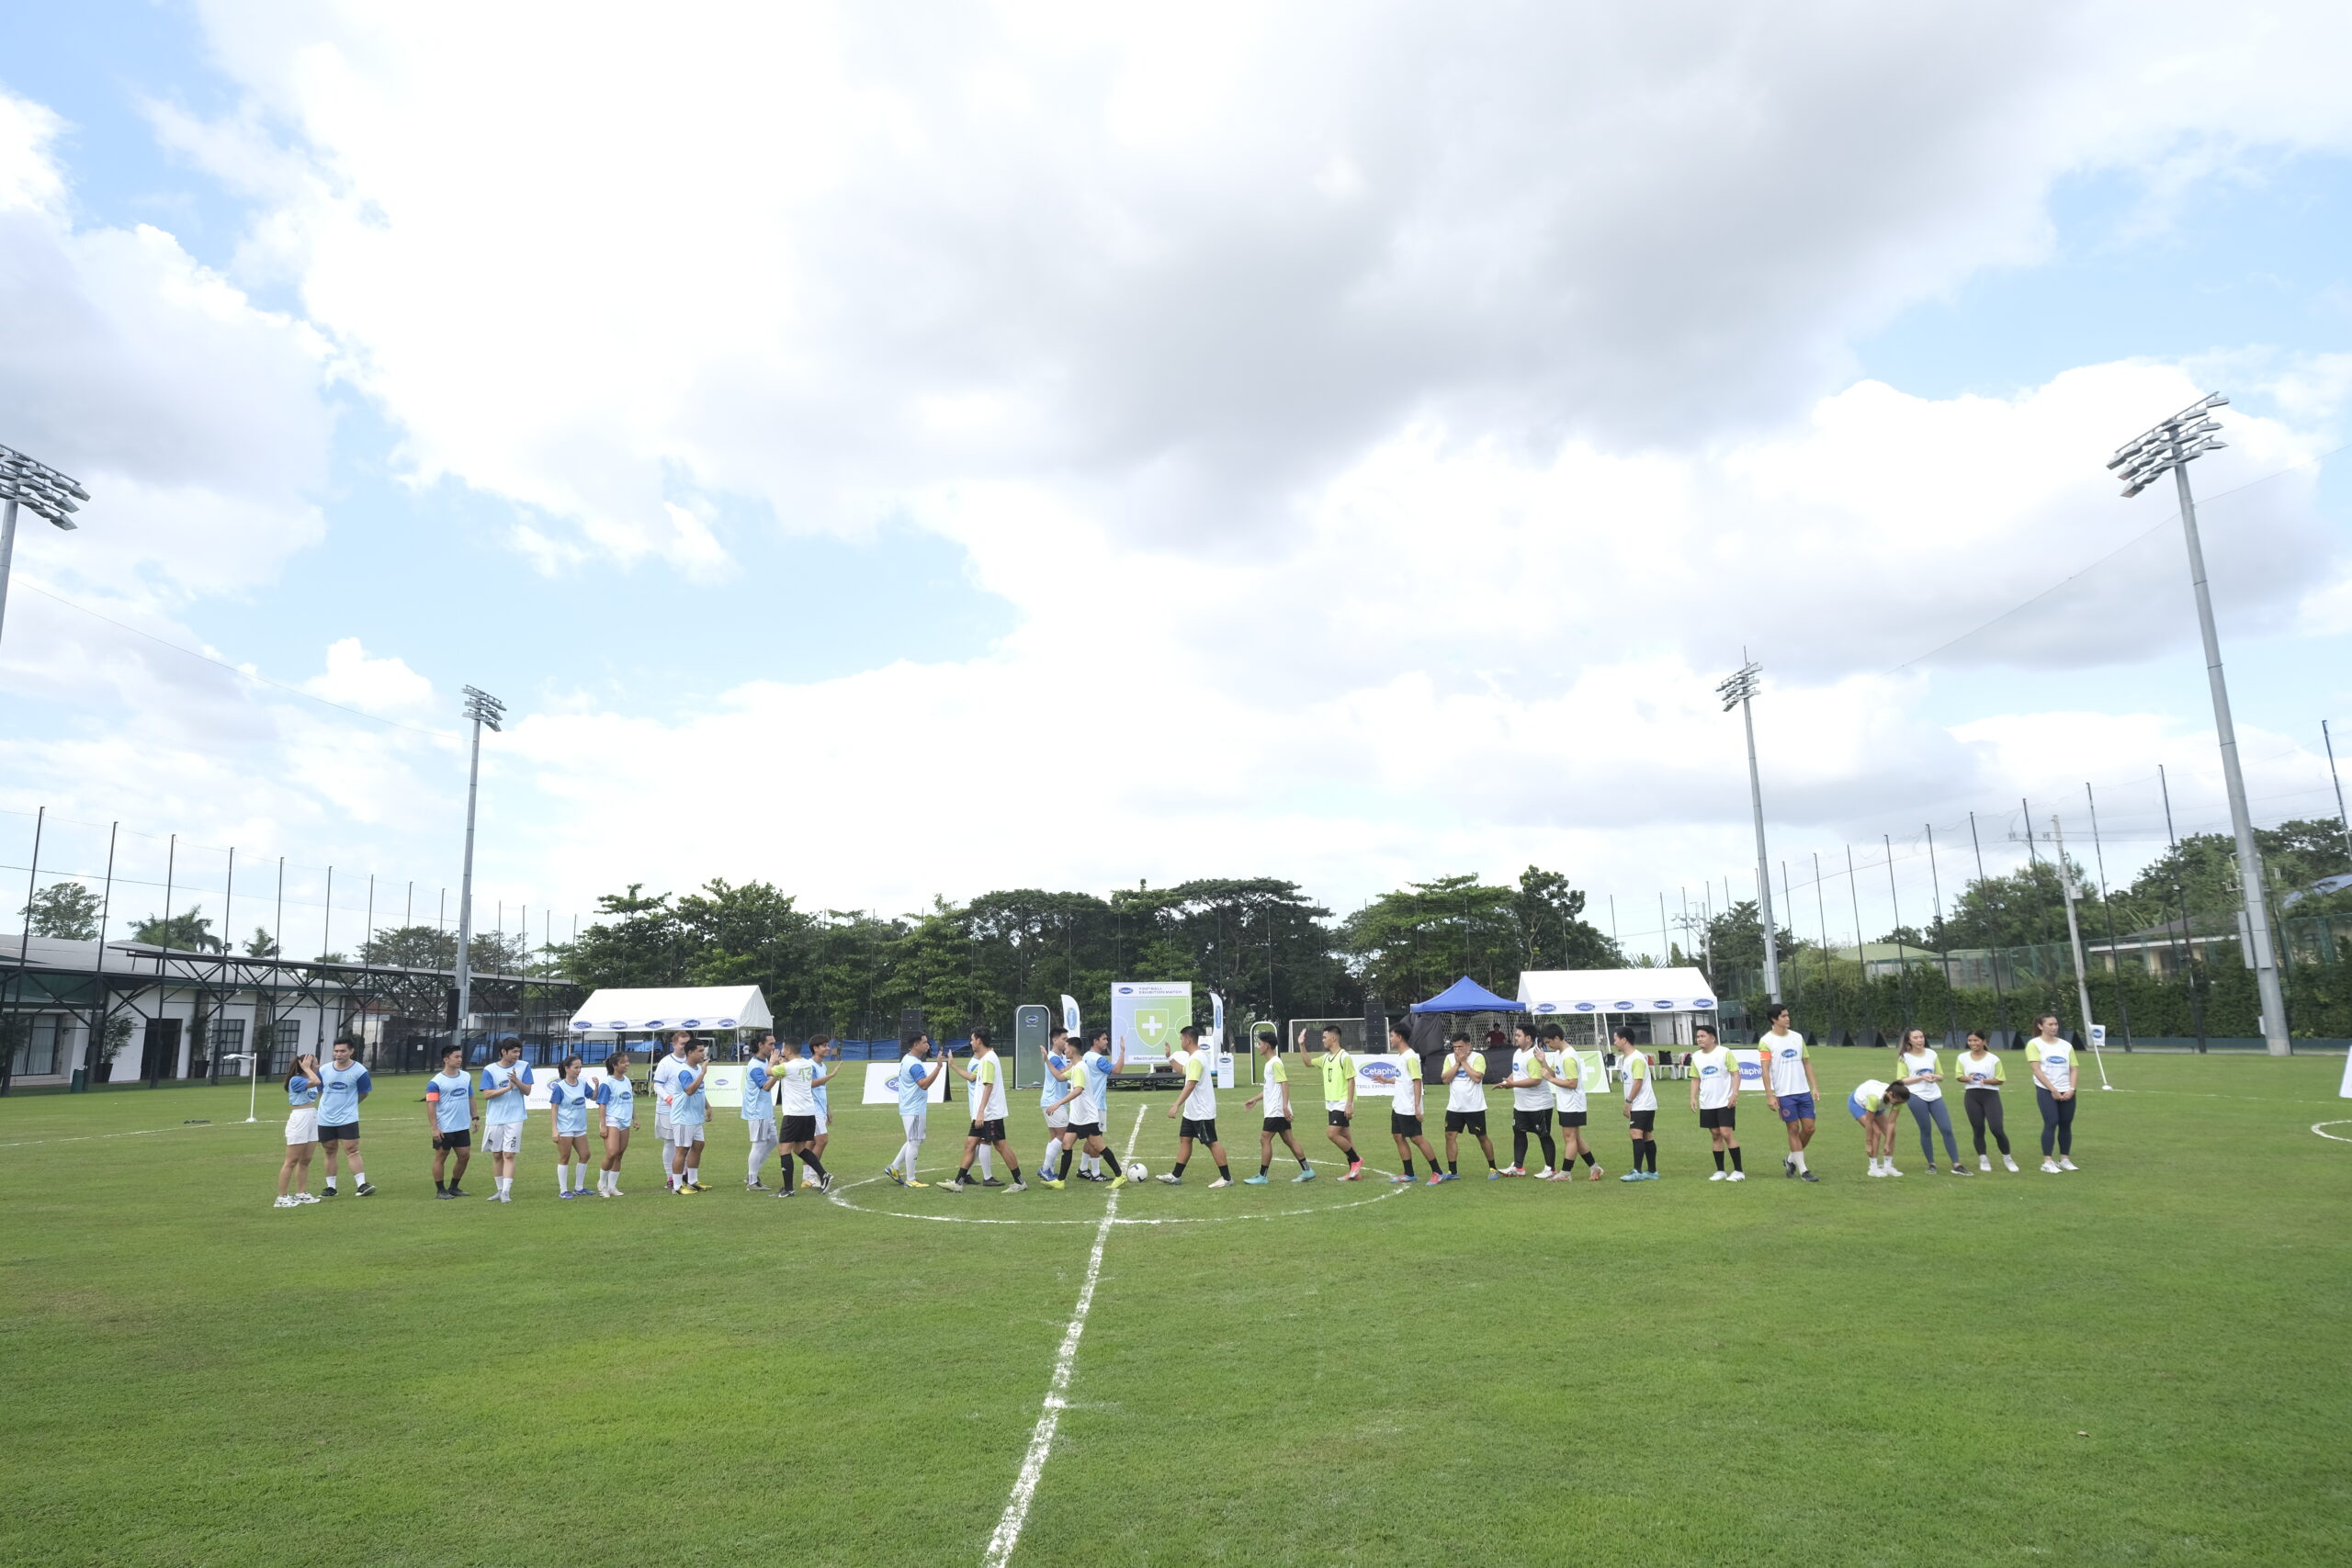 Cetaphil Level Up Series: Football Exhibition Match 